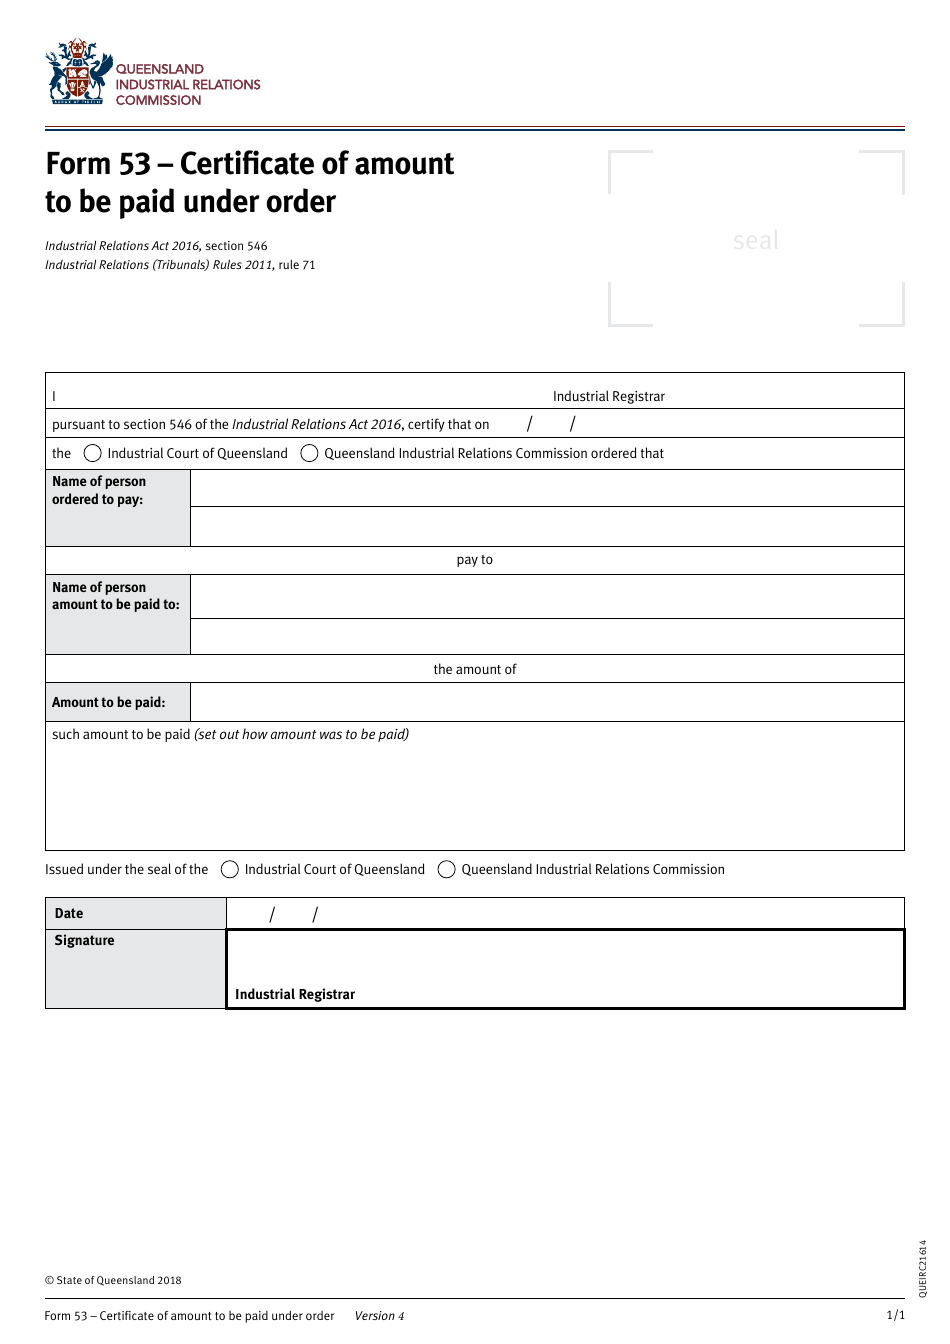 Form 53 Certificate of Amount to Be Paid Under Order - Queensland, Australia, Page 1